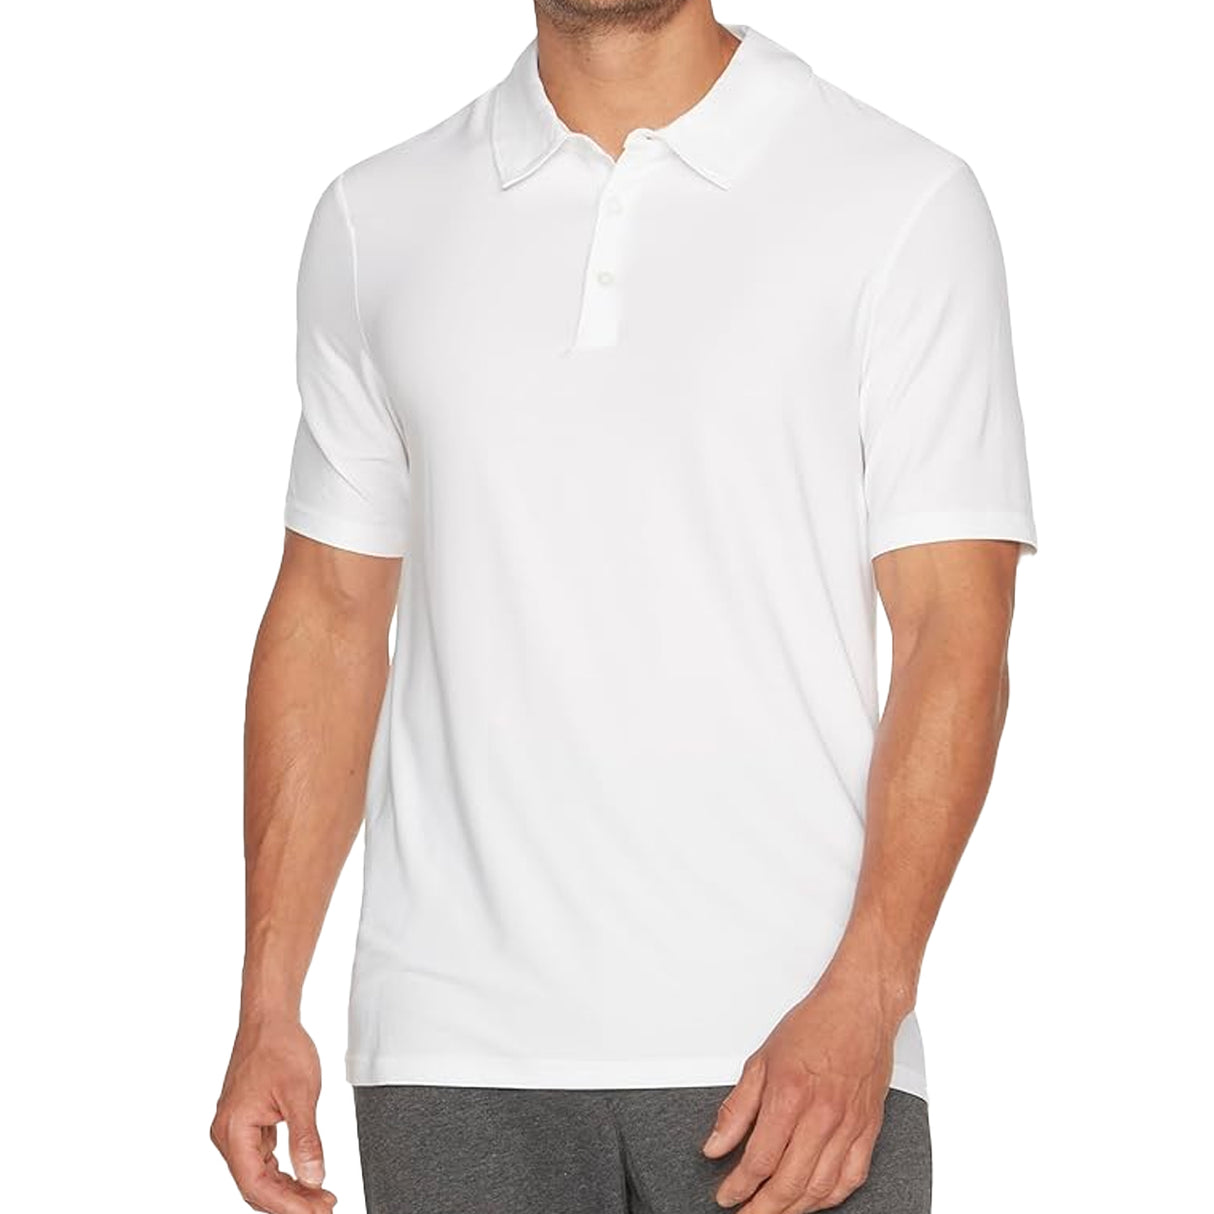 Skechers GODri All Day Solid Polo Golf Shirts